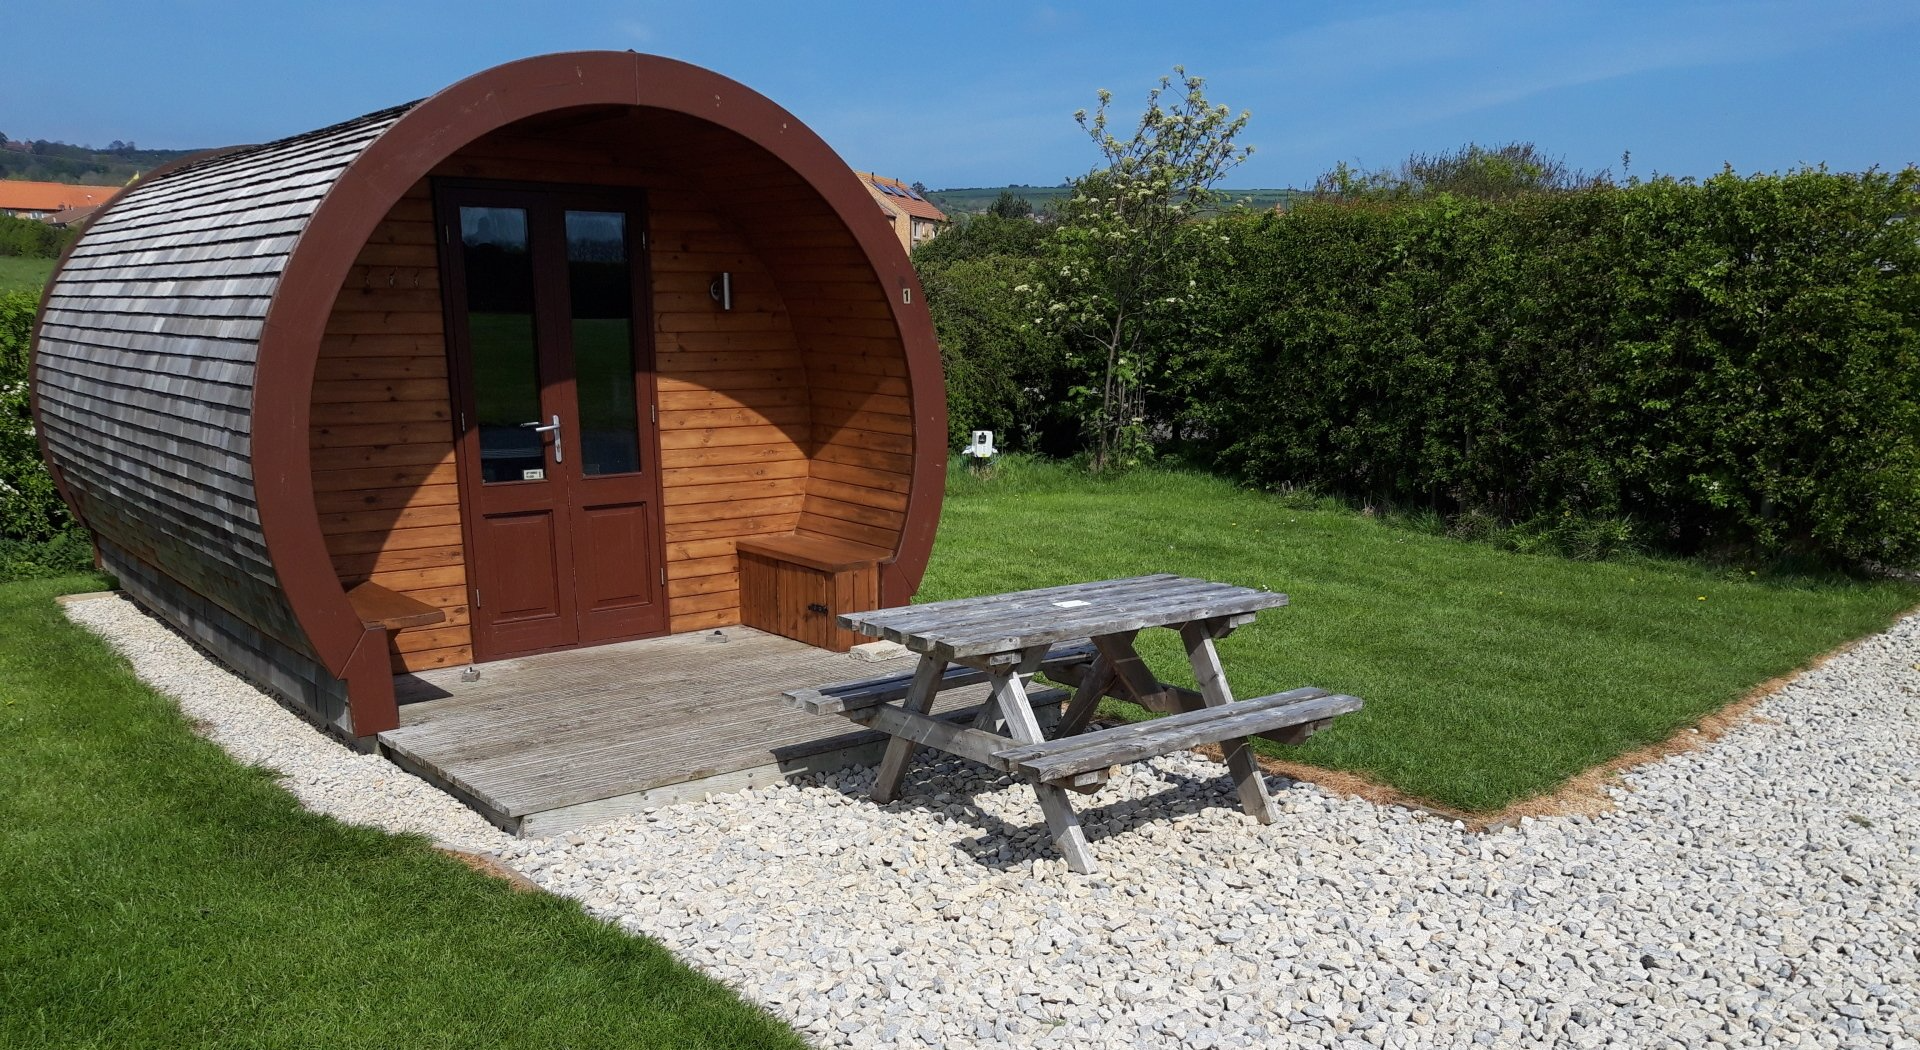 Glamping Pods in Robin Hoods Bay Provide the Perfect Summer Retreat for the Whole Family